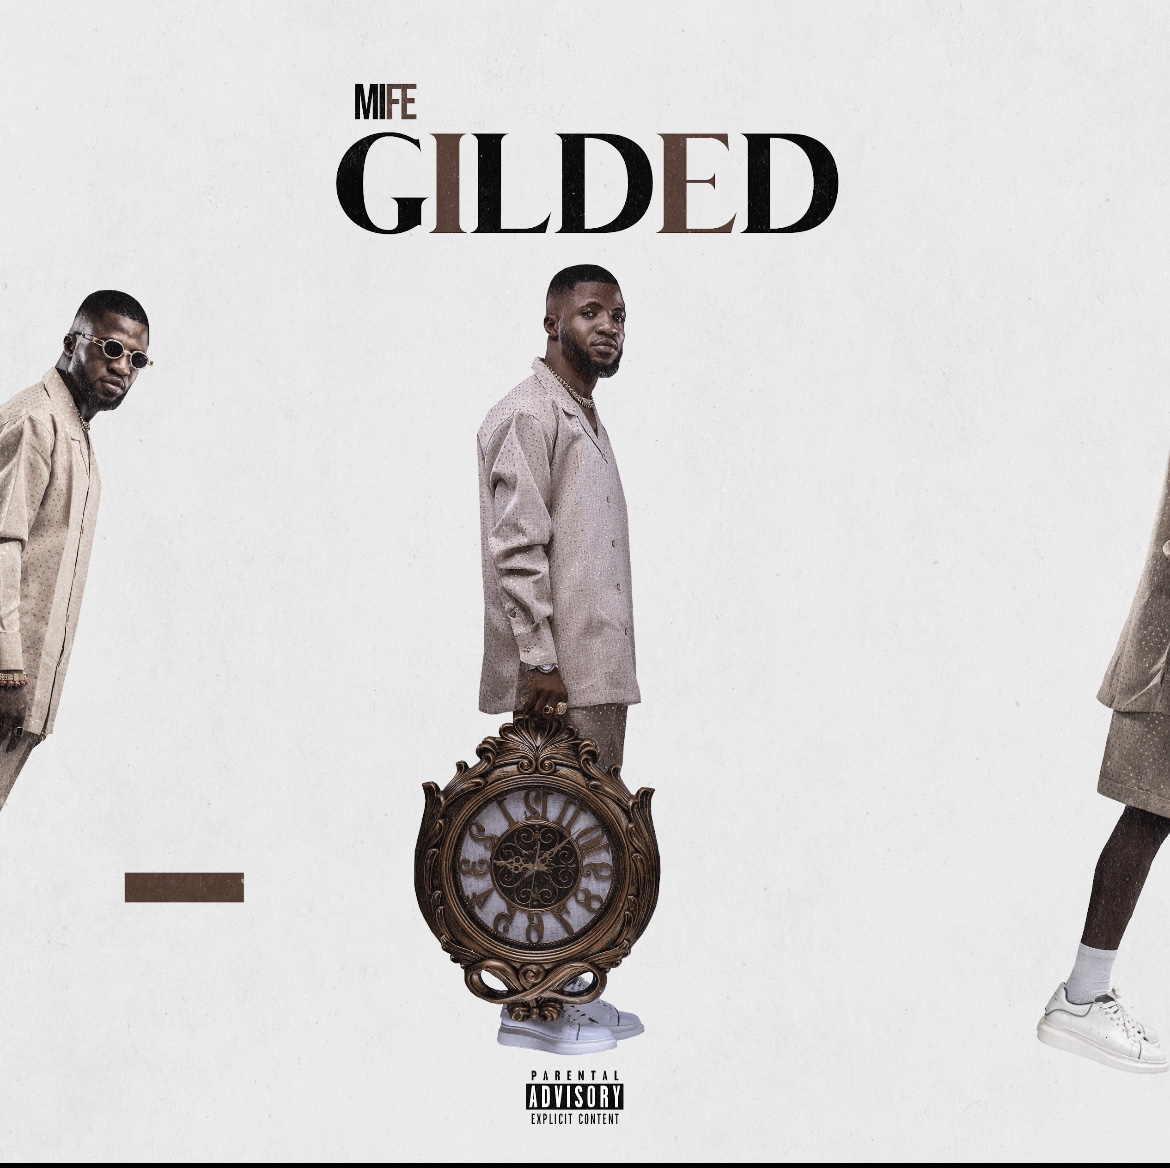 MIFE serves us with a 5-tracks EP titled GILDED